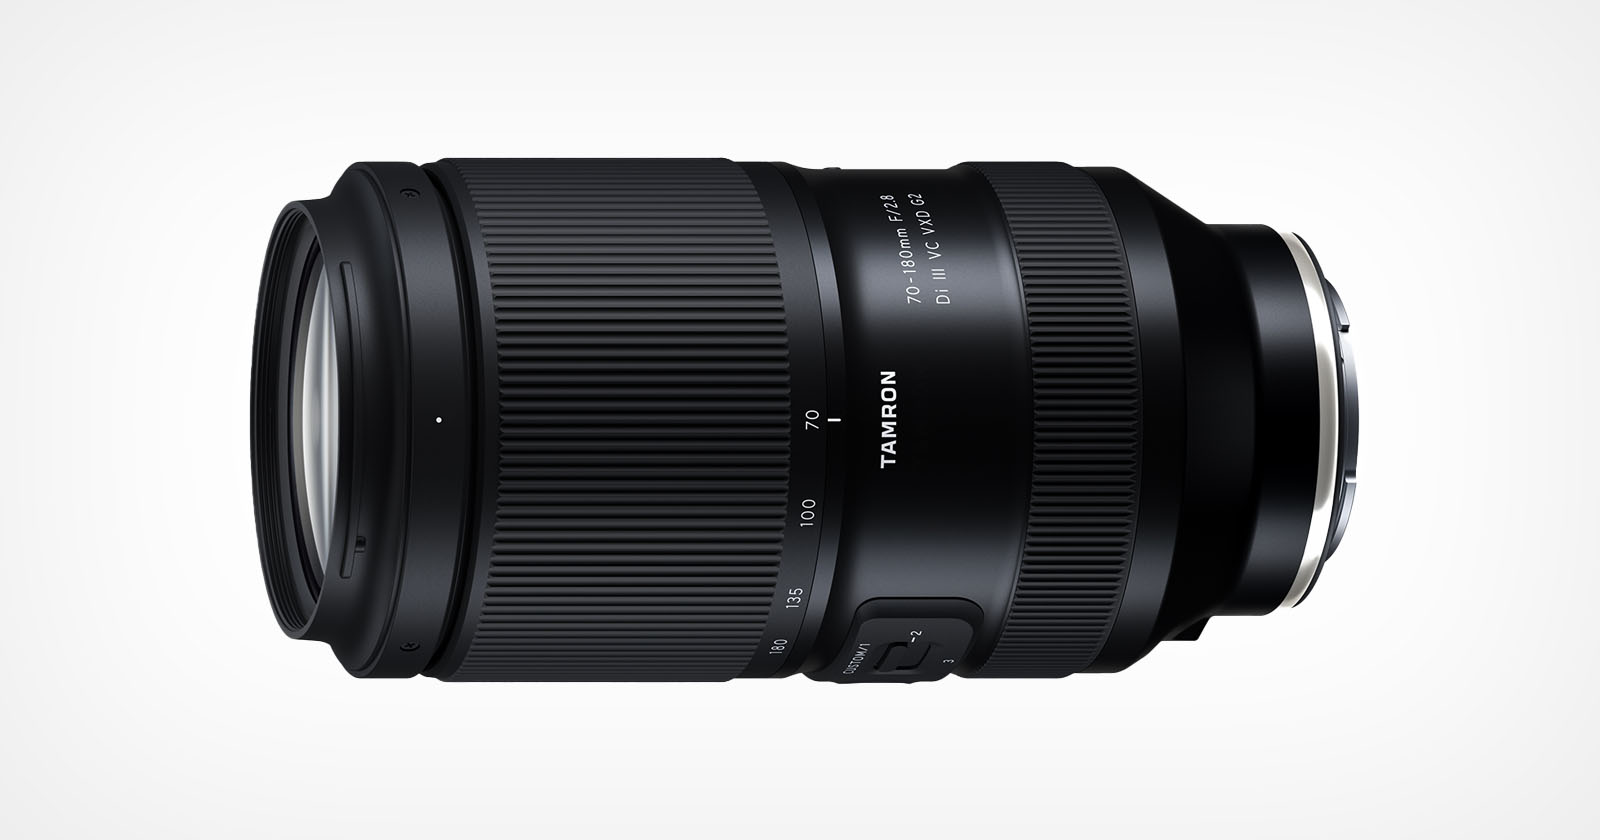 Tamron is Developing a Second-Gen 70-180mm f/2.8 for Sony E-Mount